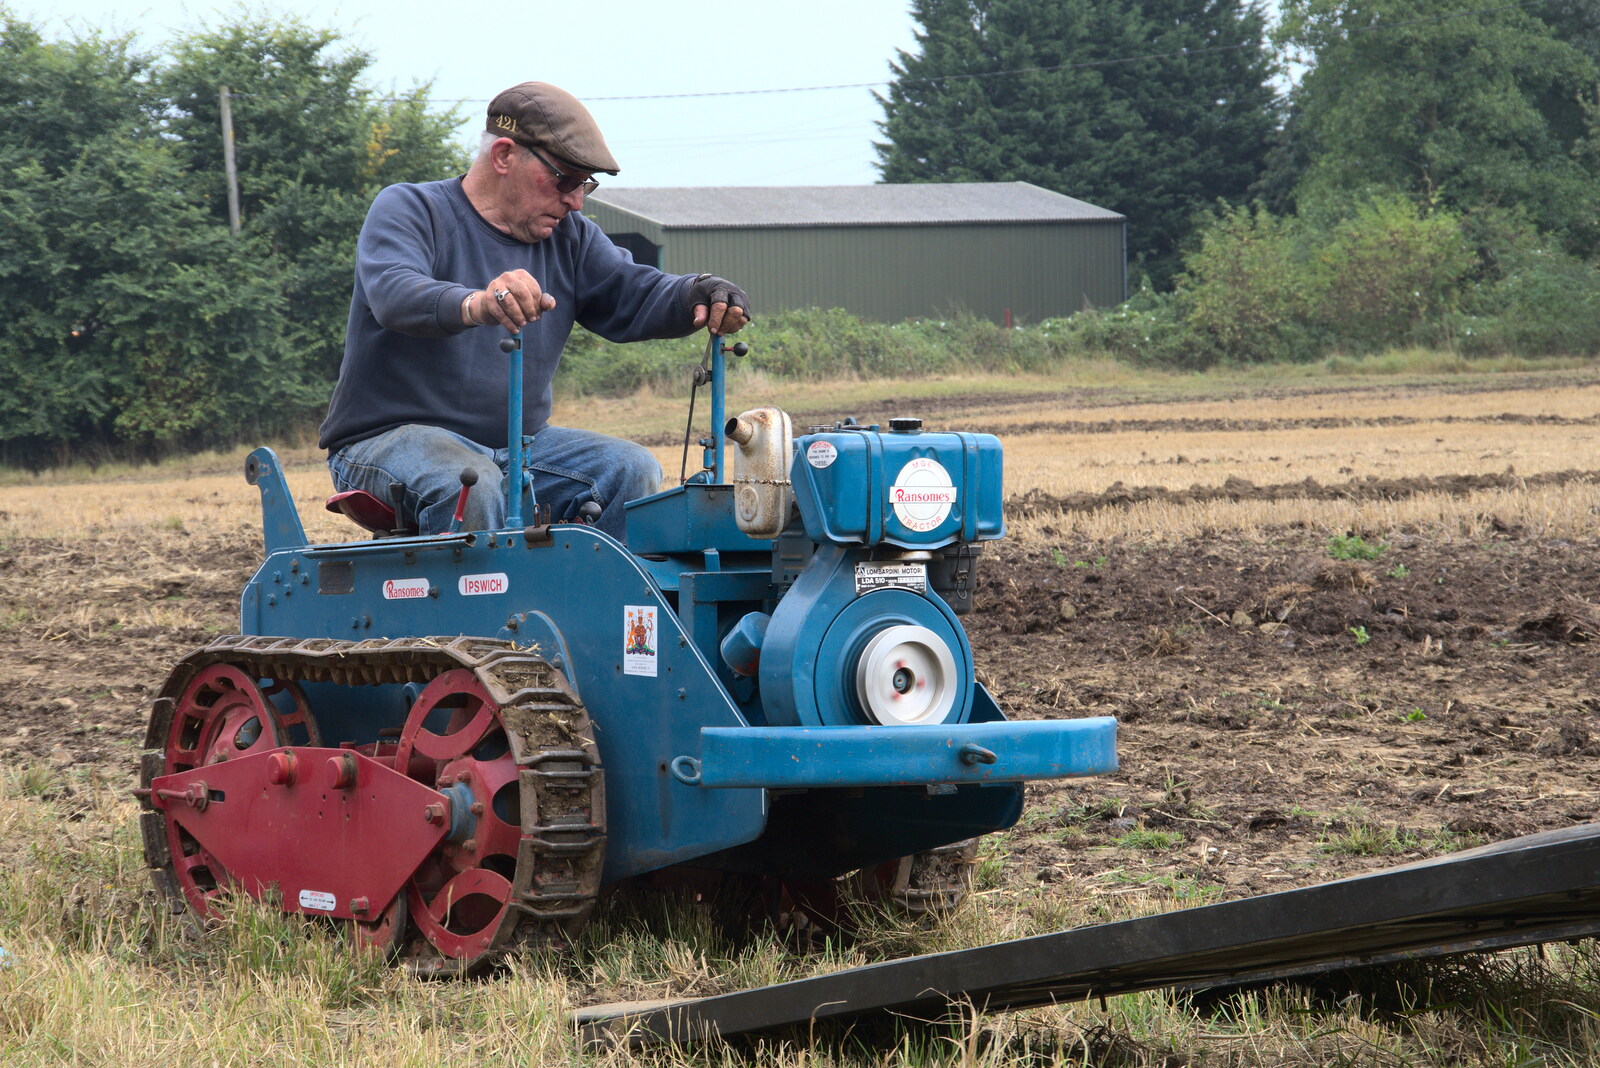 Vintage Tractor Ploughing, Thrandeston, Suffolk - 26th September 2021: The Ransome's micro tractor is driven up a ramp